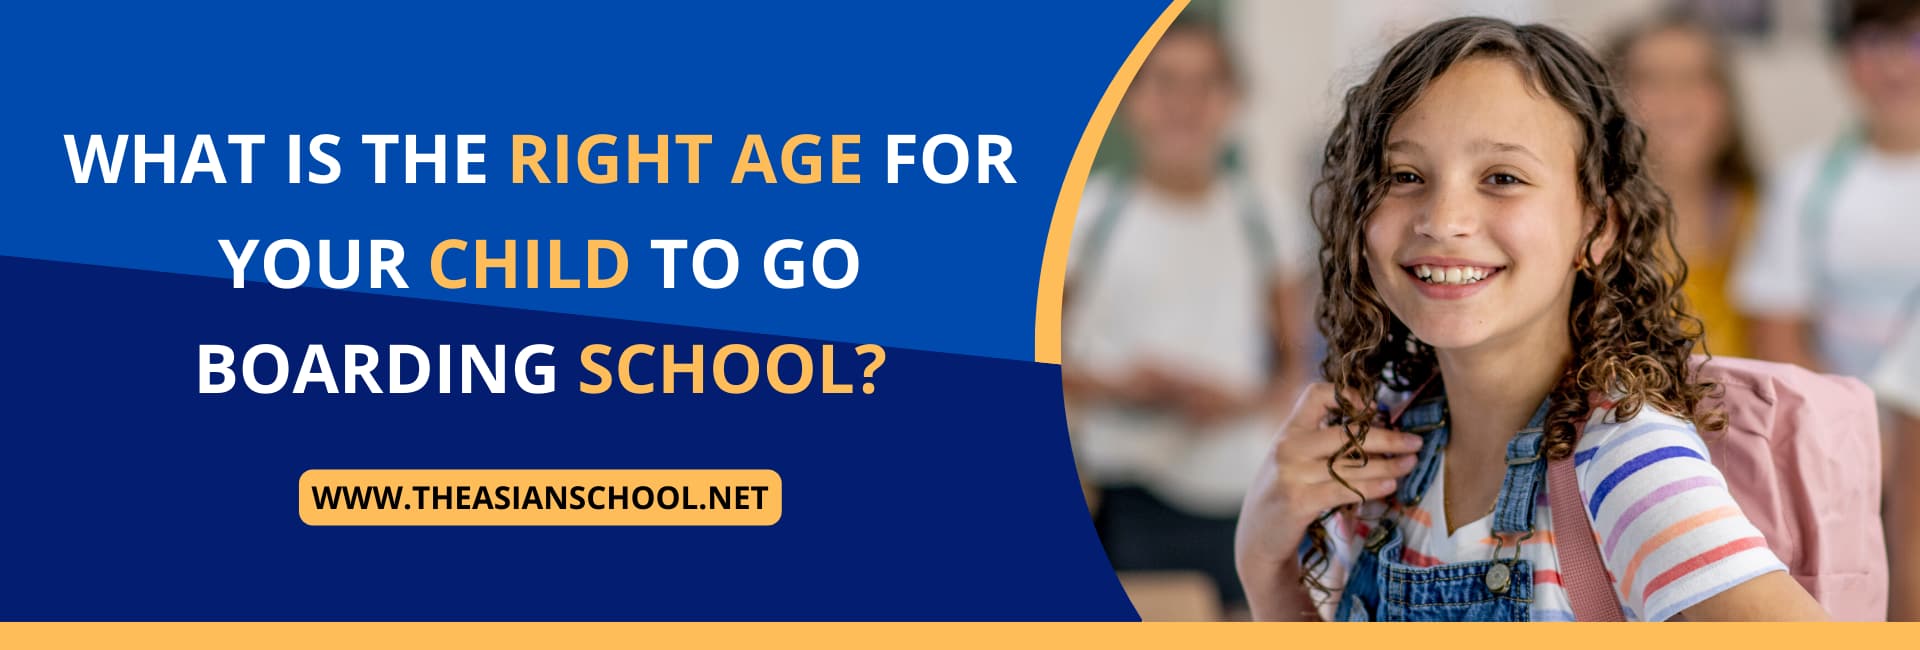 What is the Right Age for Your Child to Go Boarding School